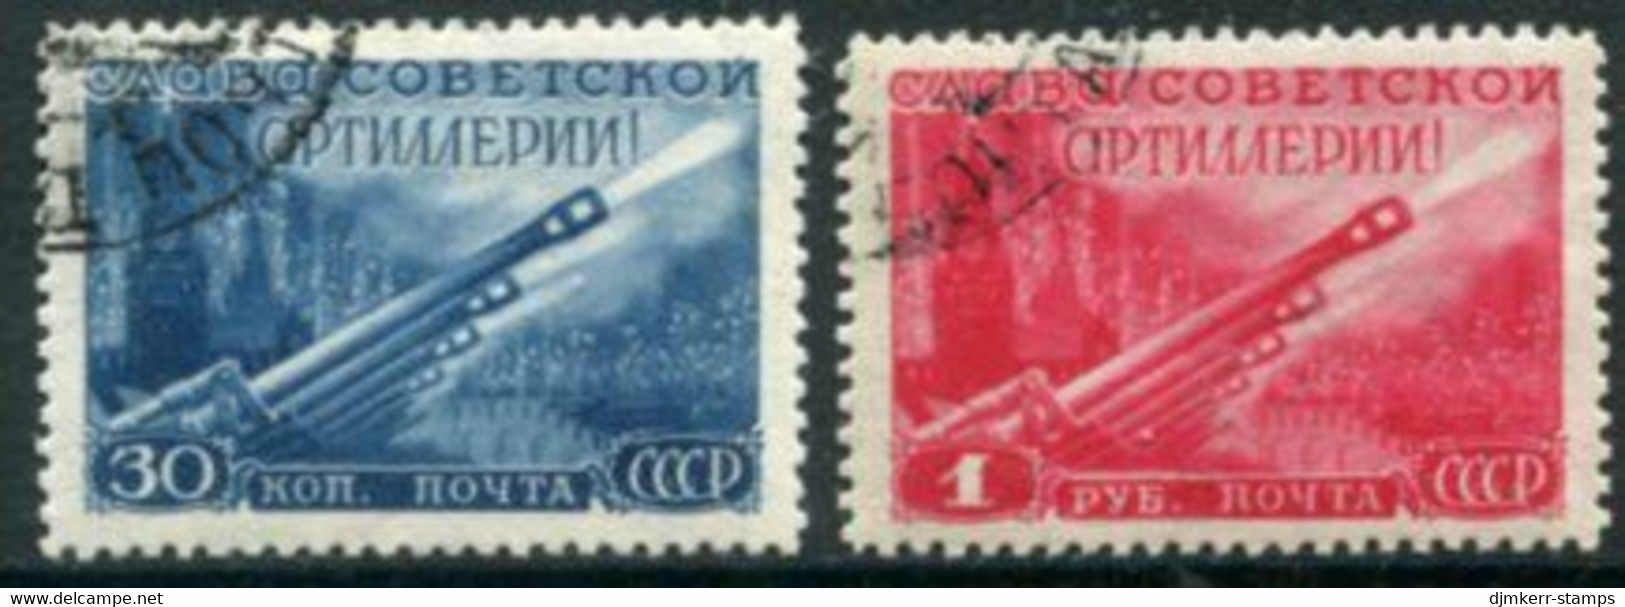 SOVIET UNION 1948 Artillery Day Used.  Michel 1290-91 - Used Stamps